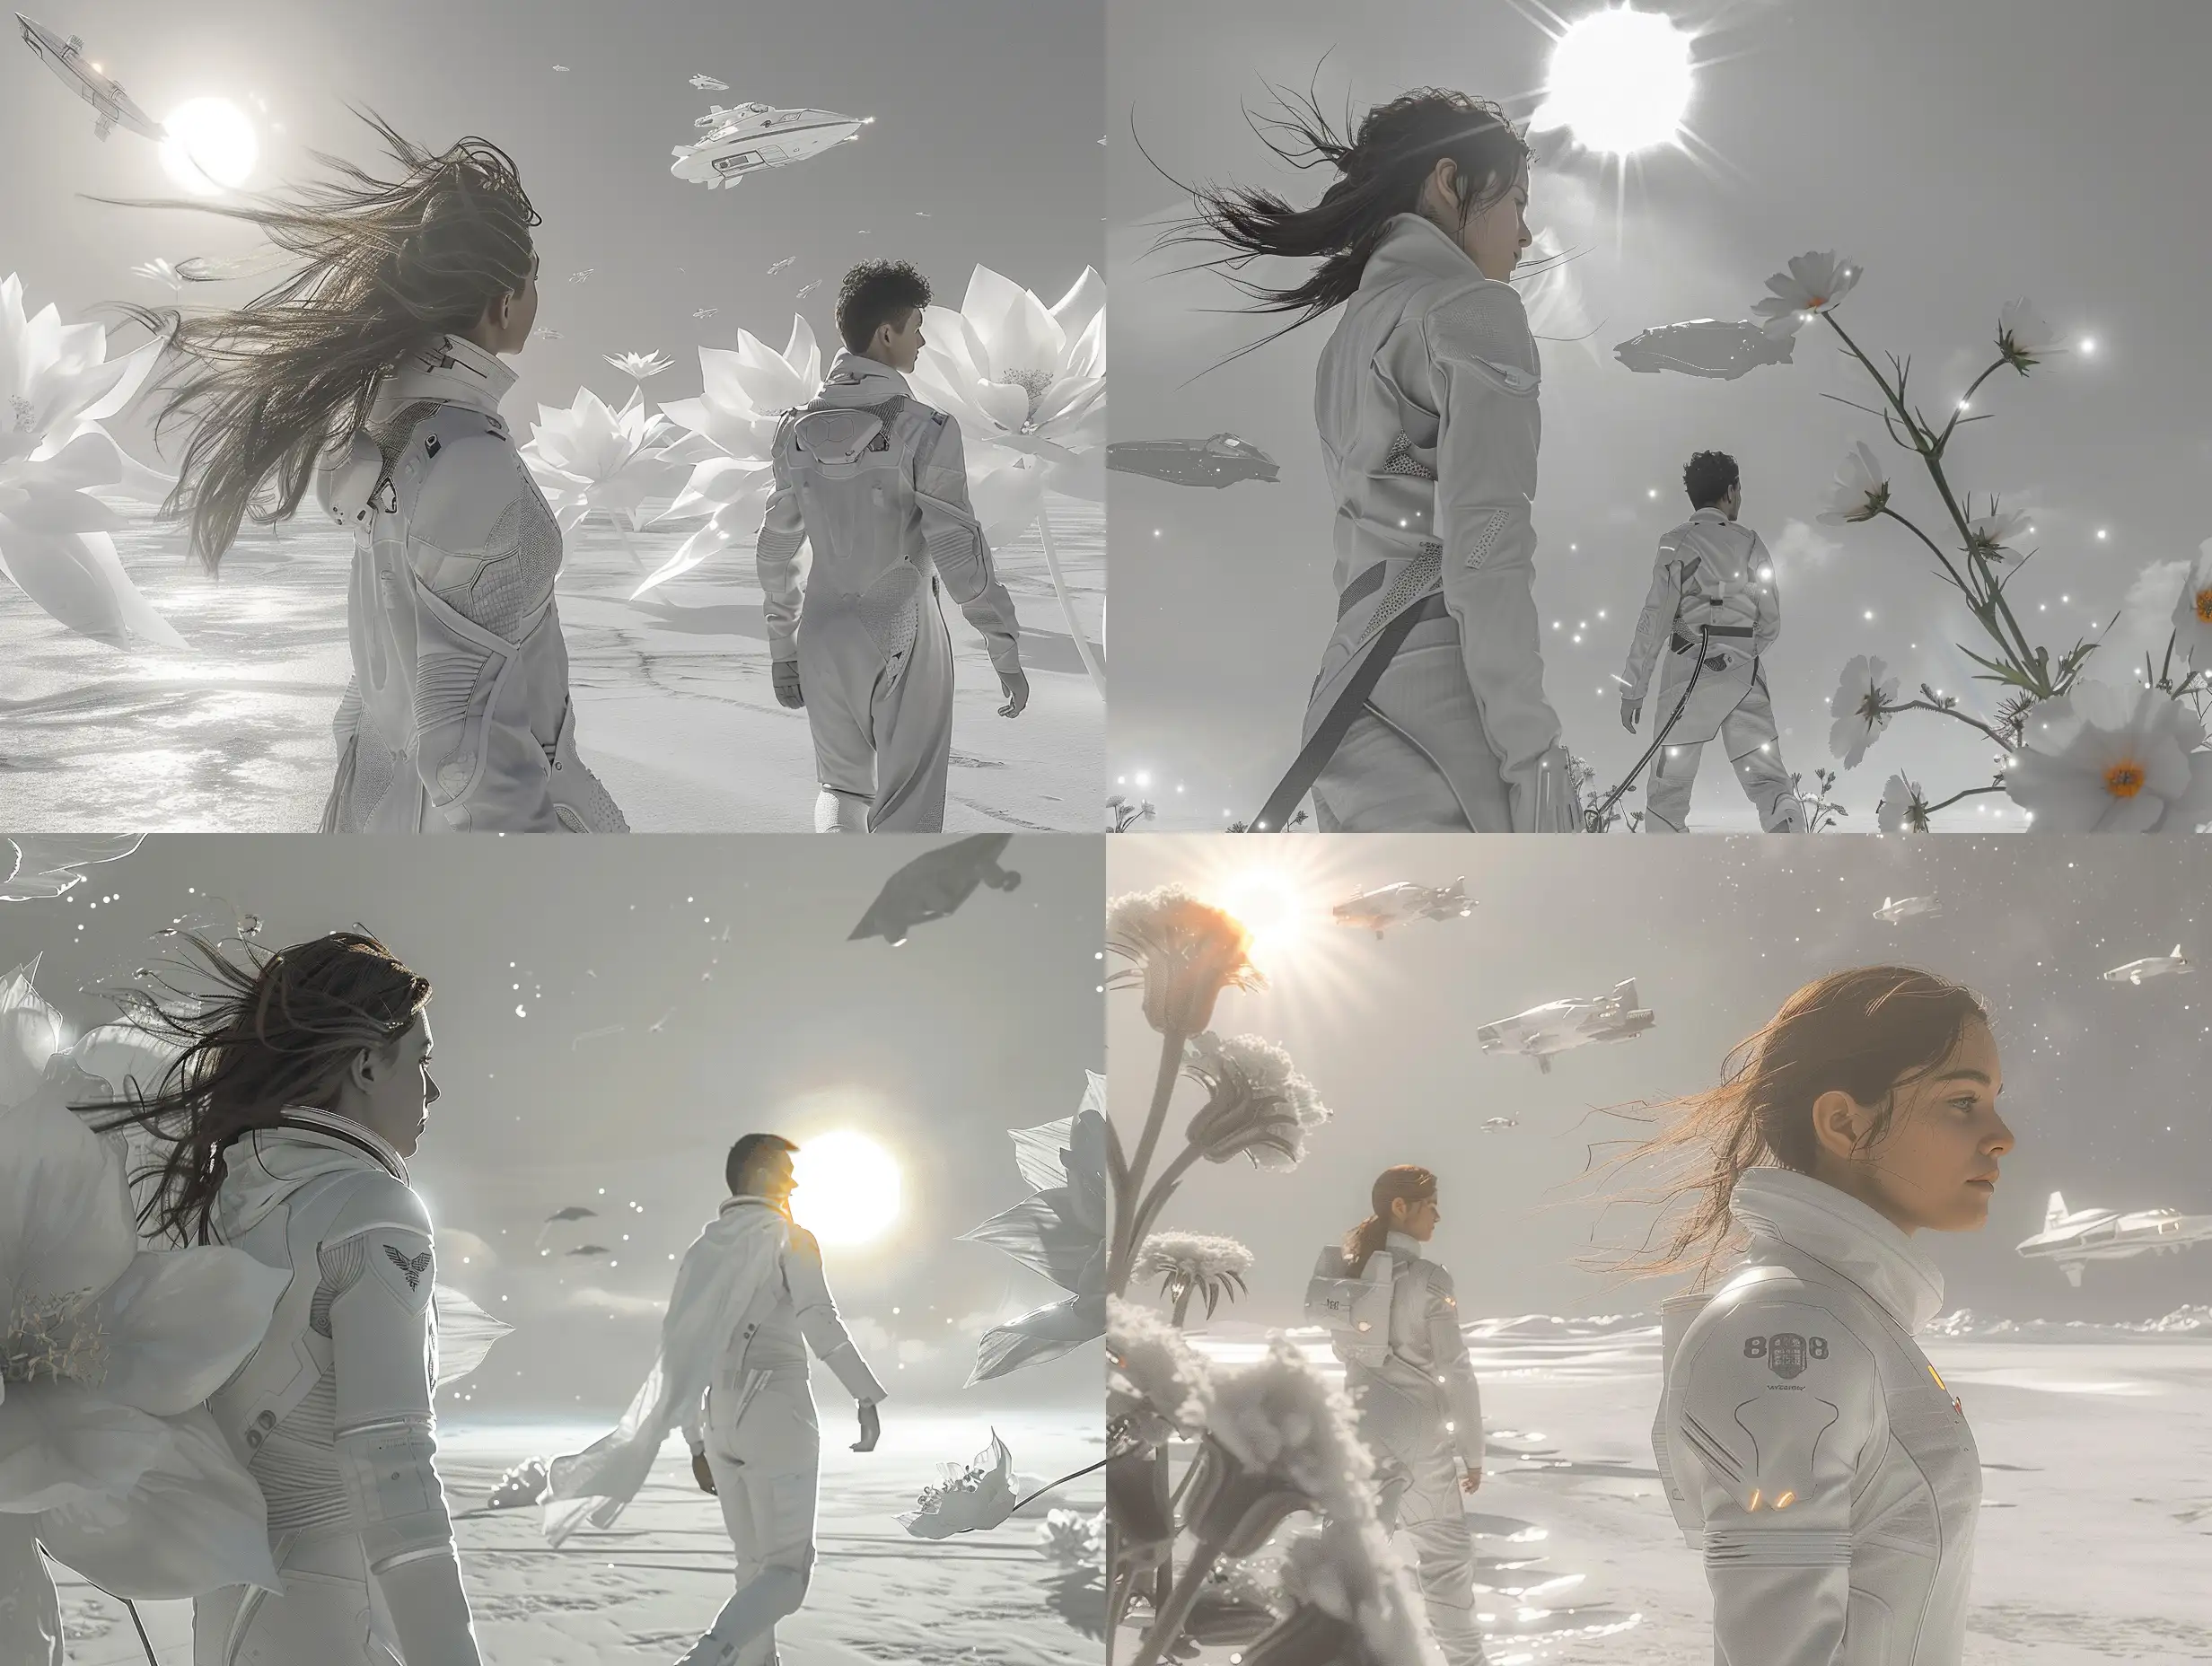 Exploring-Otherworldly-Landscapes-Girl-and-Man-in-White-Space-Suits-Walking-Amidst-Giant-Flowers-and-Spaceships